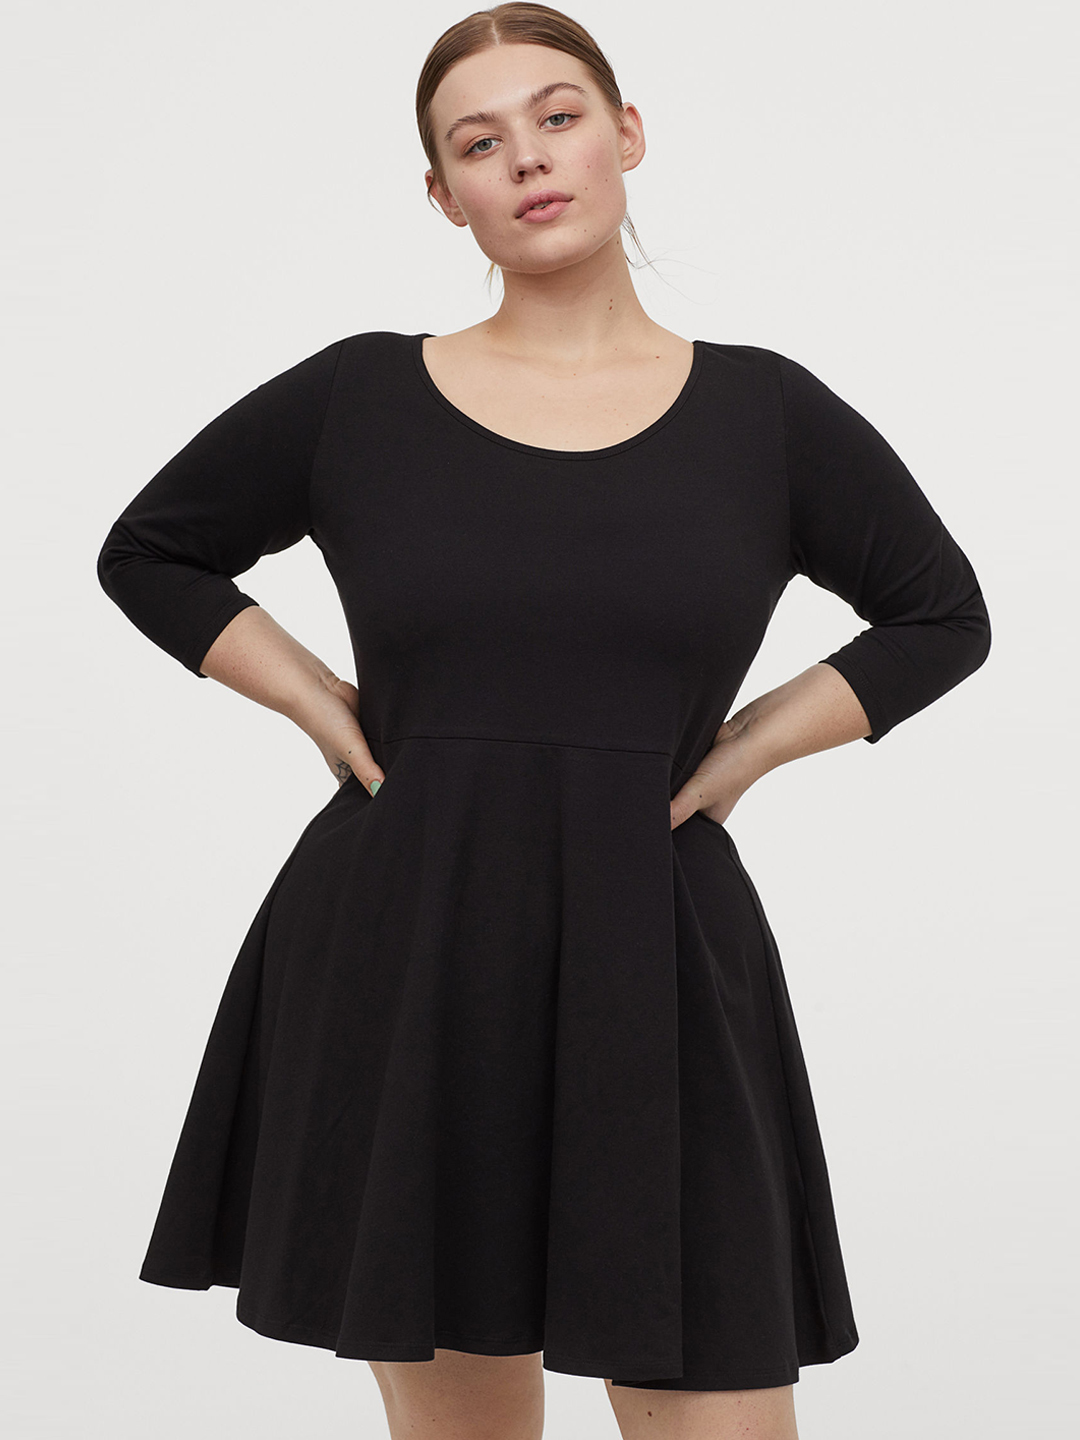 H&M+ Women Black Bell-Shaped Jersey Dress Price in India